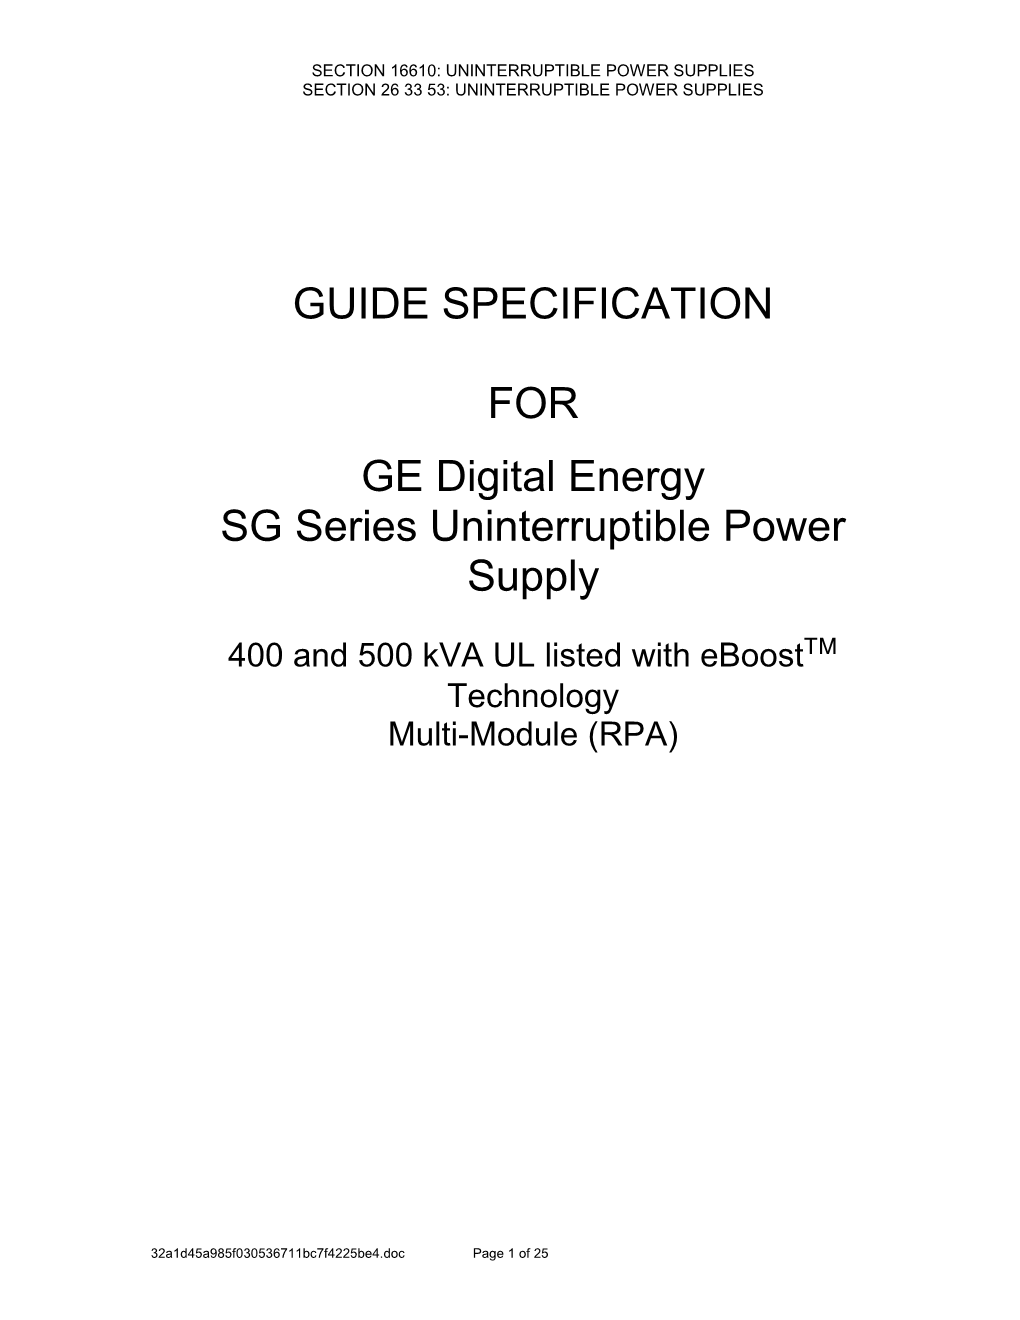 400 & 500Kva SG Series UPS with Eboost Technology - UL Listed